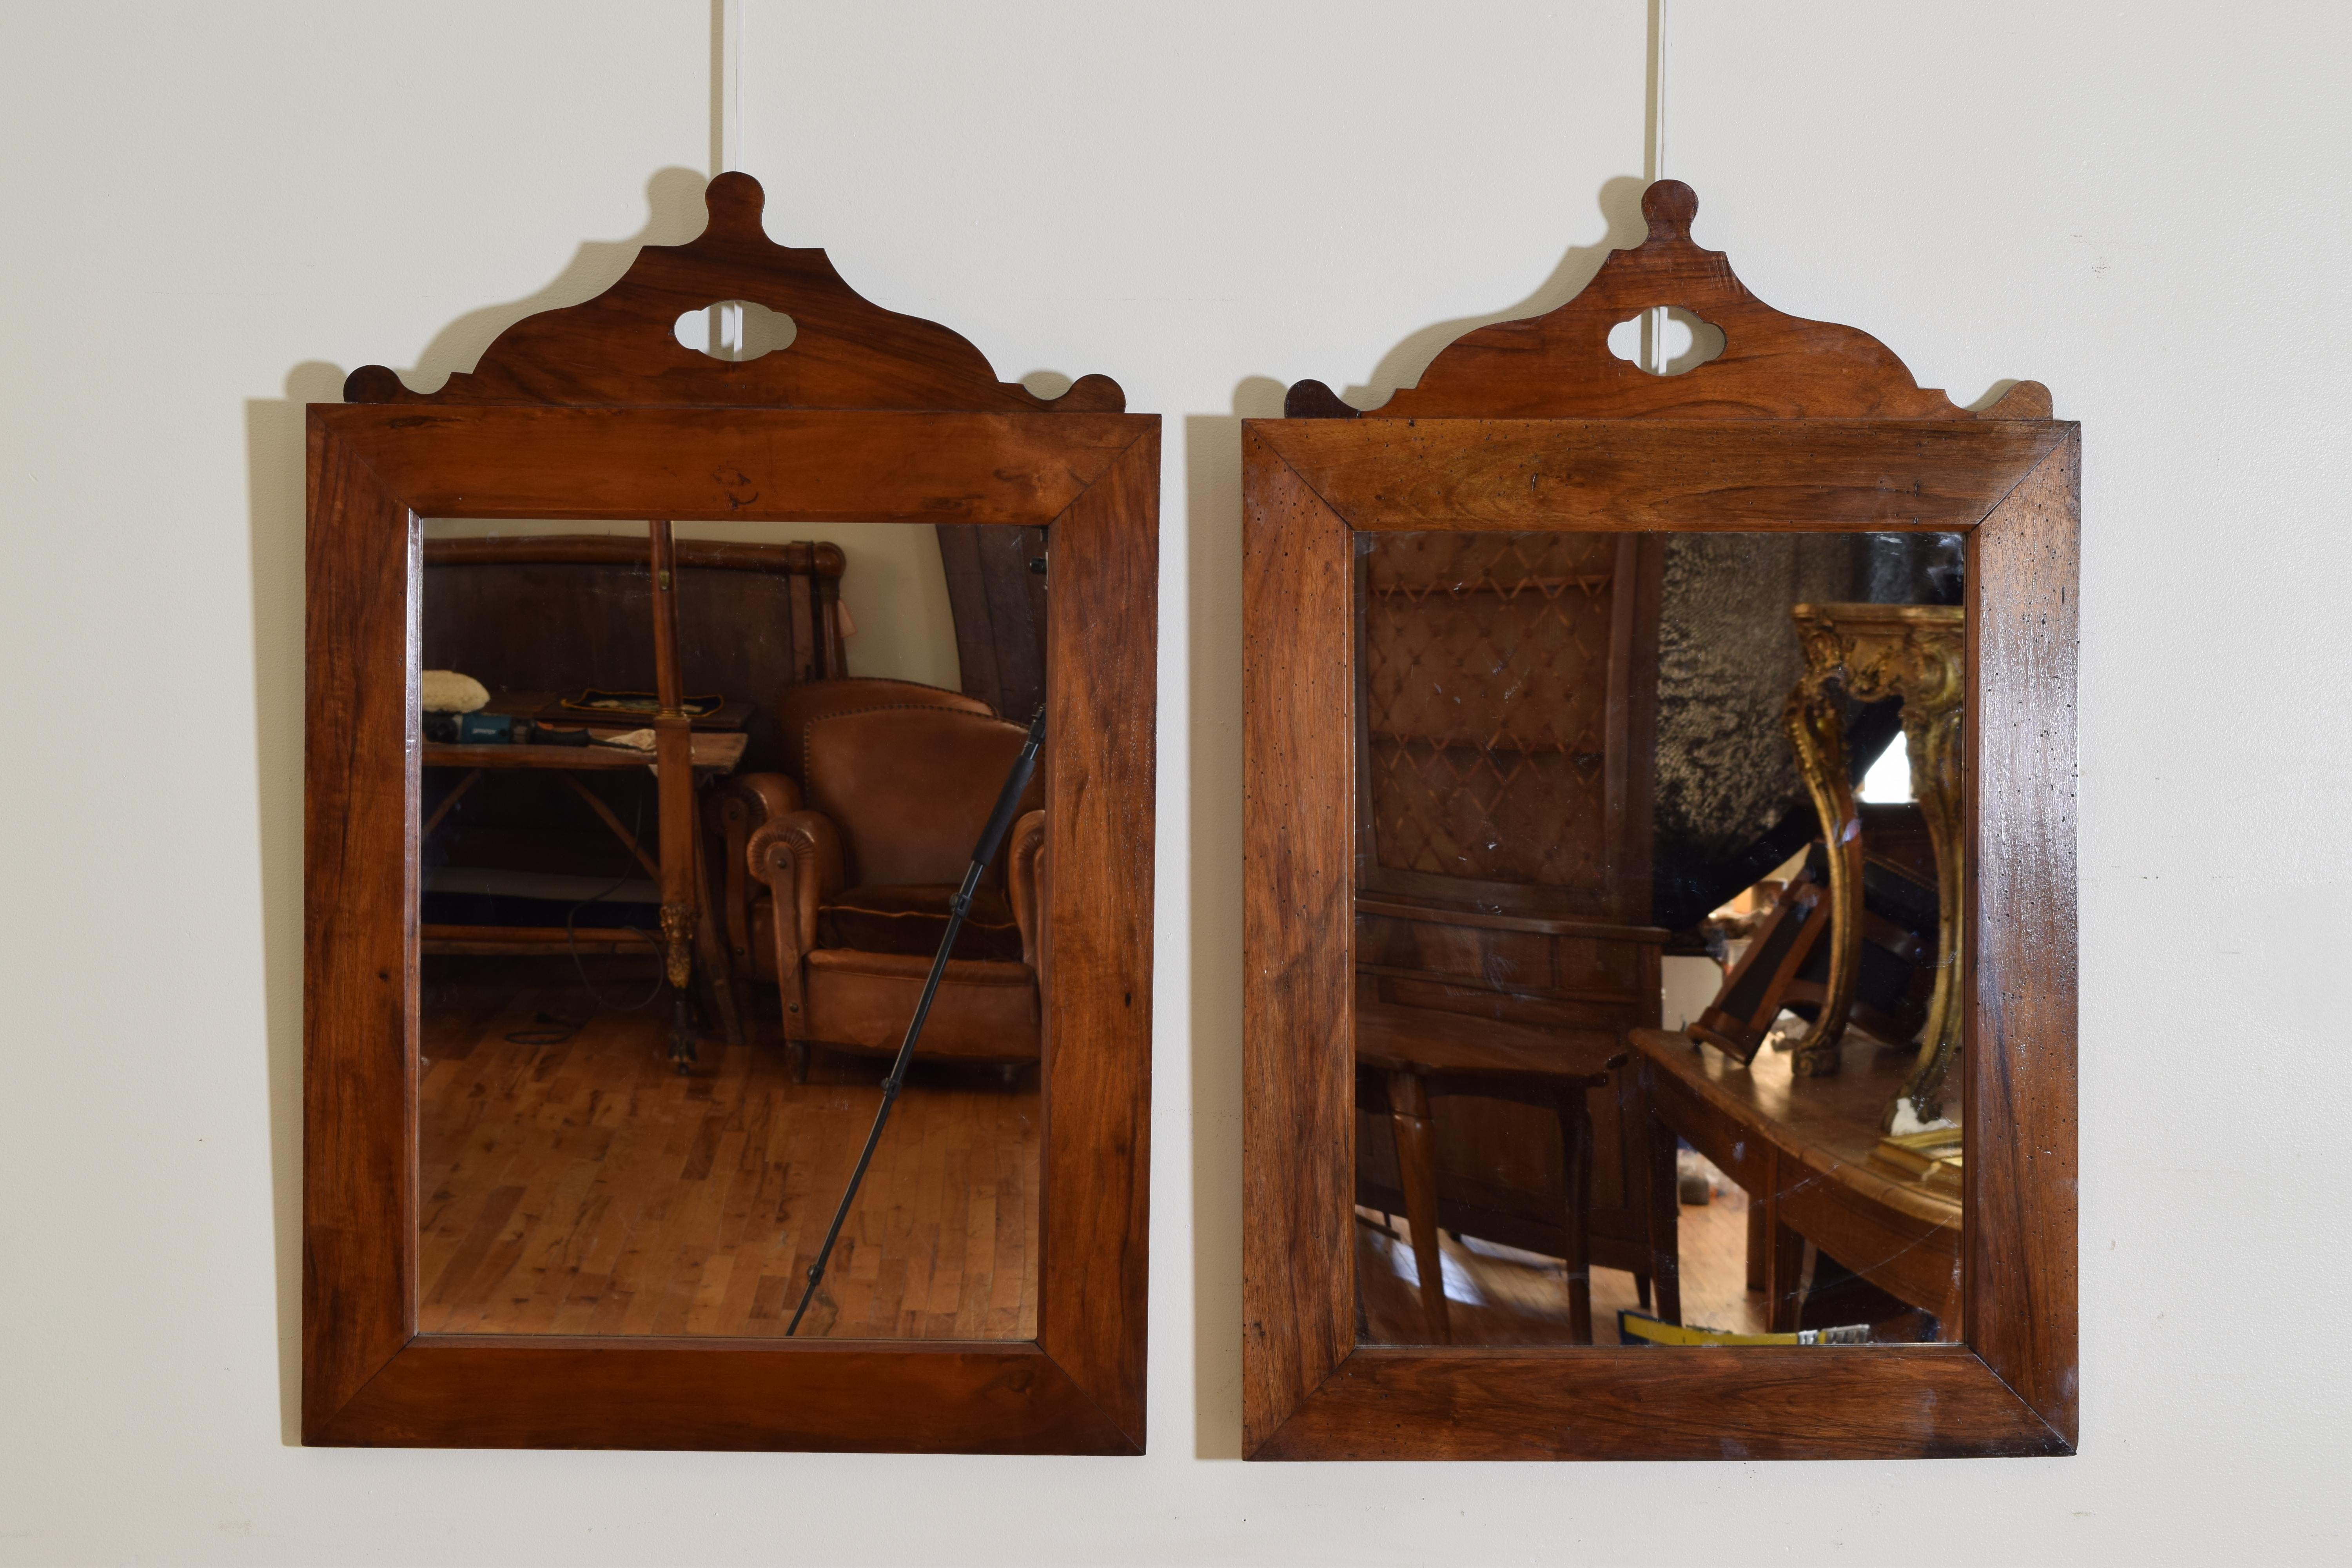 Constructed of solid walnut the rectangular frames surmounted by shaped tops, with new mirrorplates